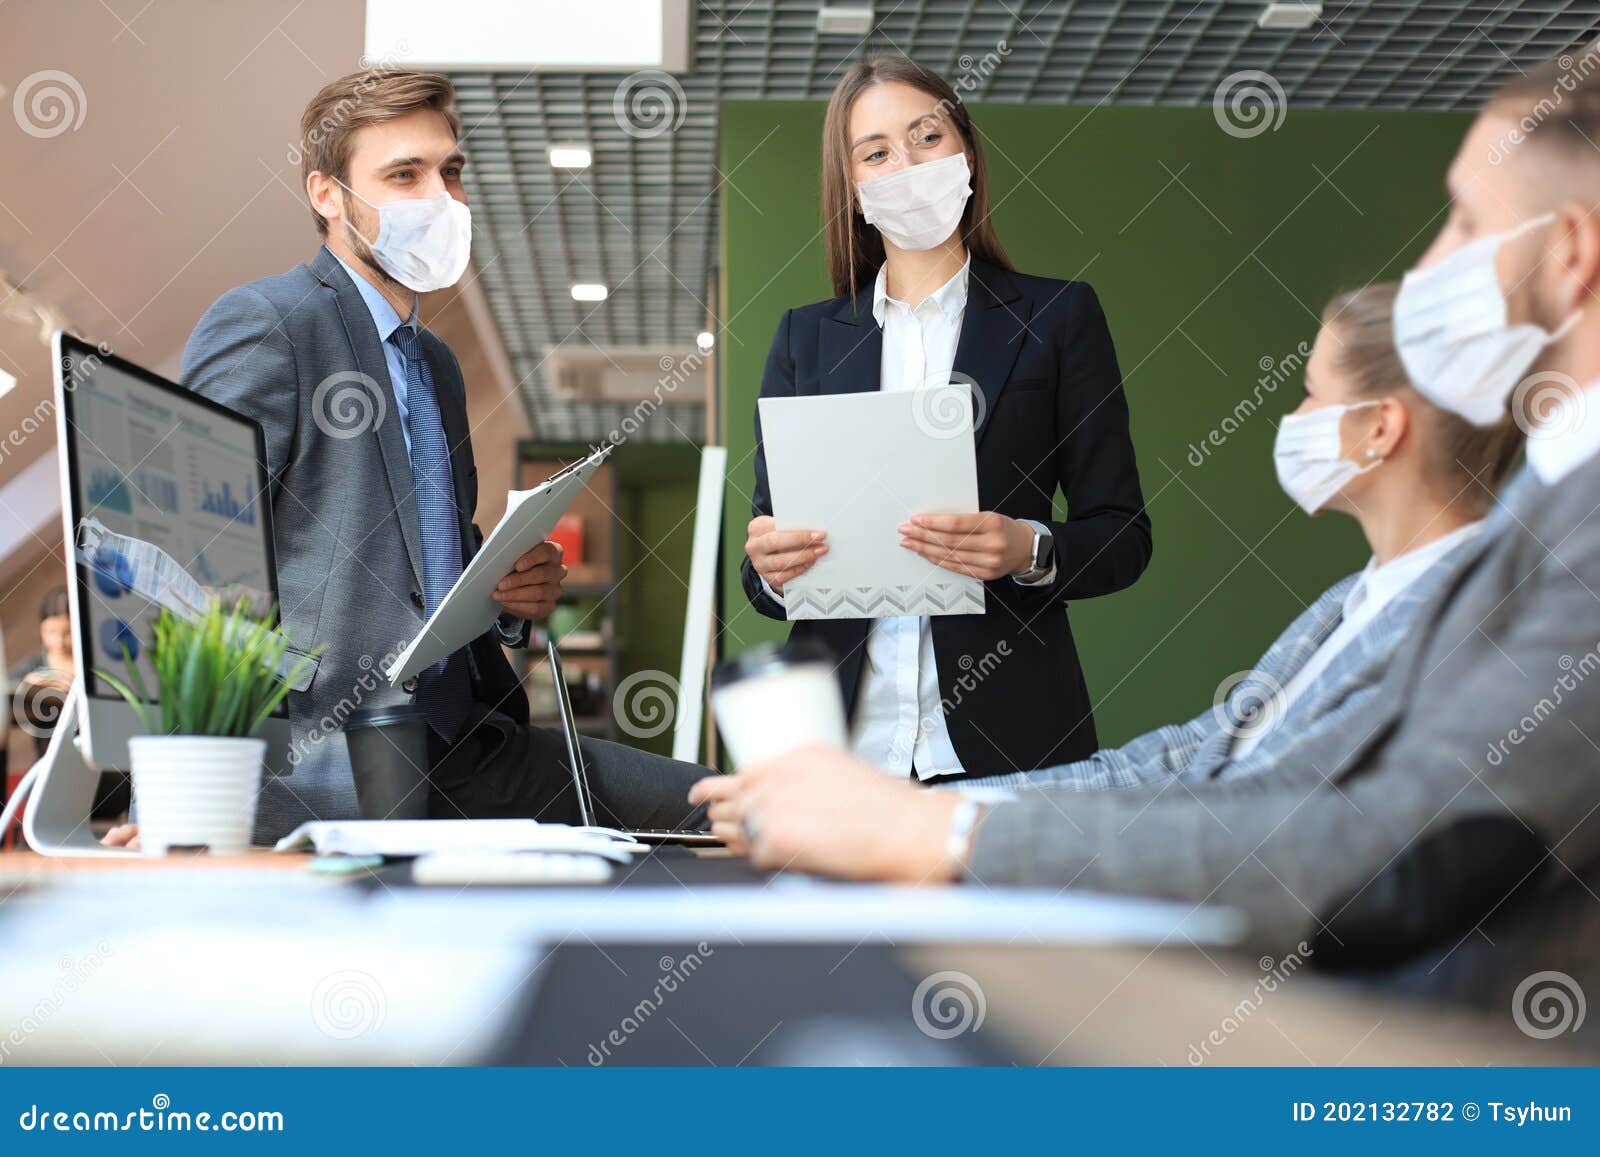 business people wear preventive masks during epidemy in office.